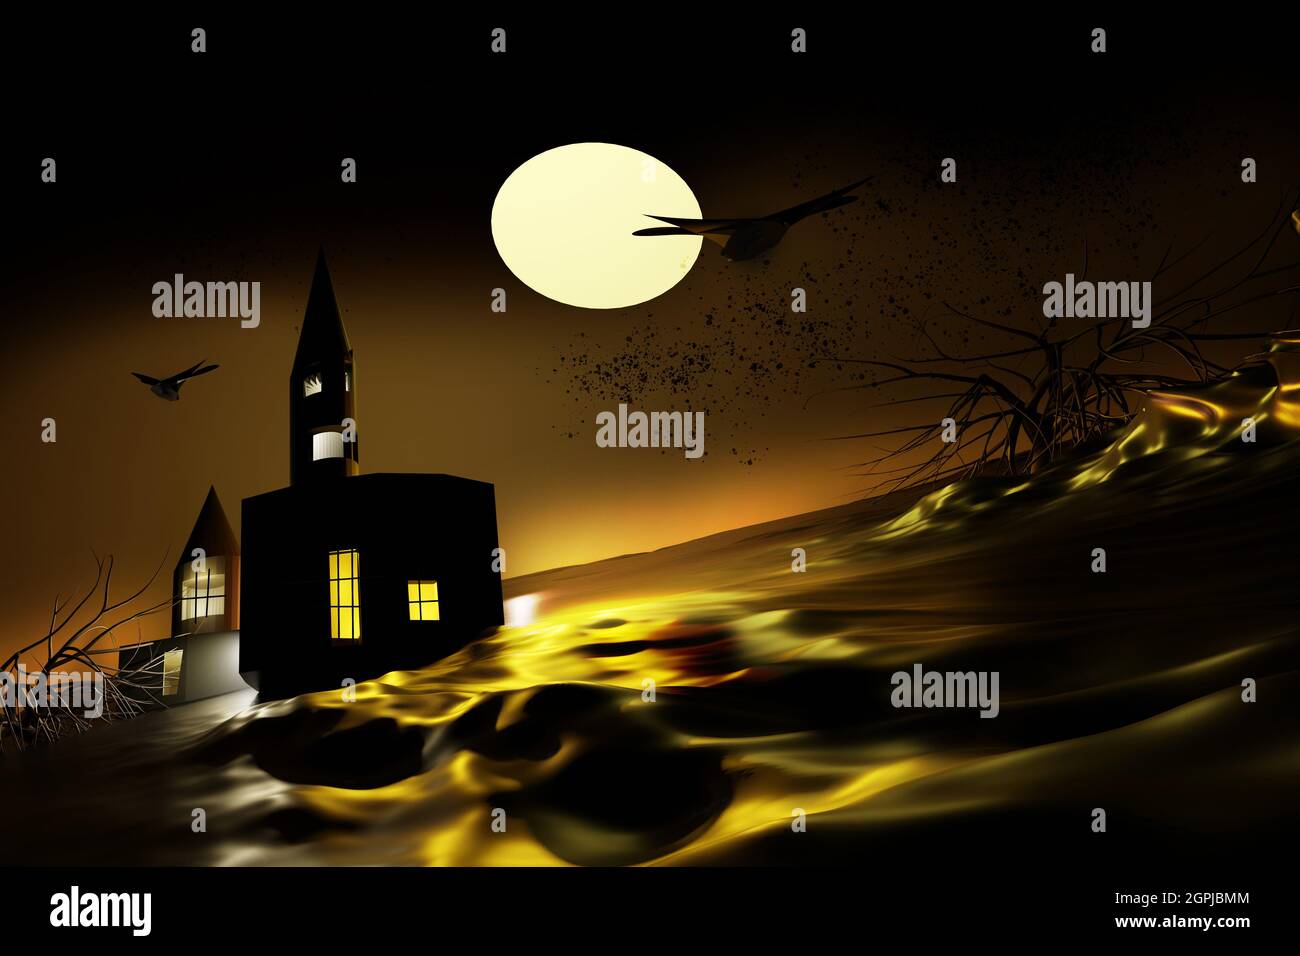 Halloween background. Night scene with haunted castle and full moon. Stock Photo